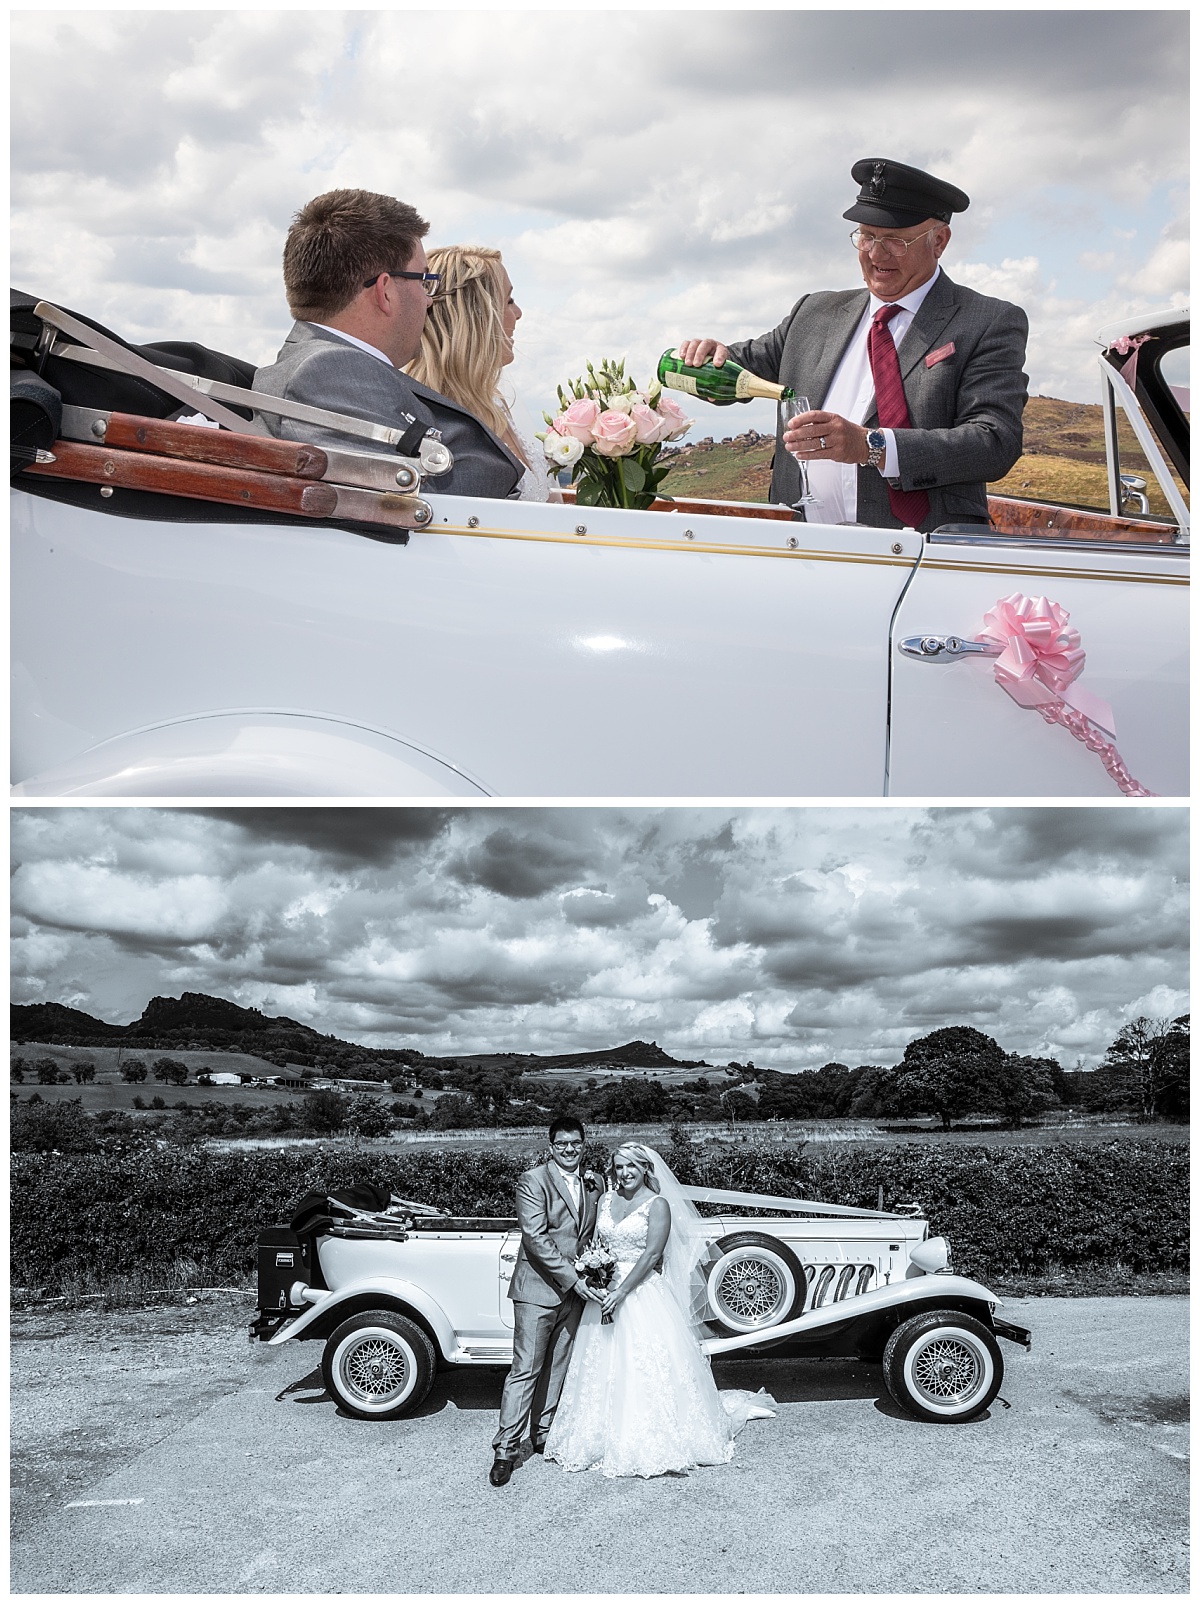 Wedding Photography Manchester - Lisa and James's The Three Horseshoes Country Inn wedding 35